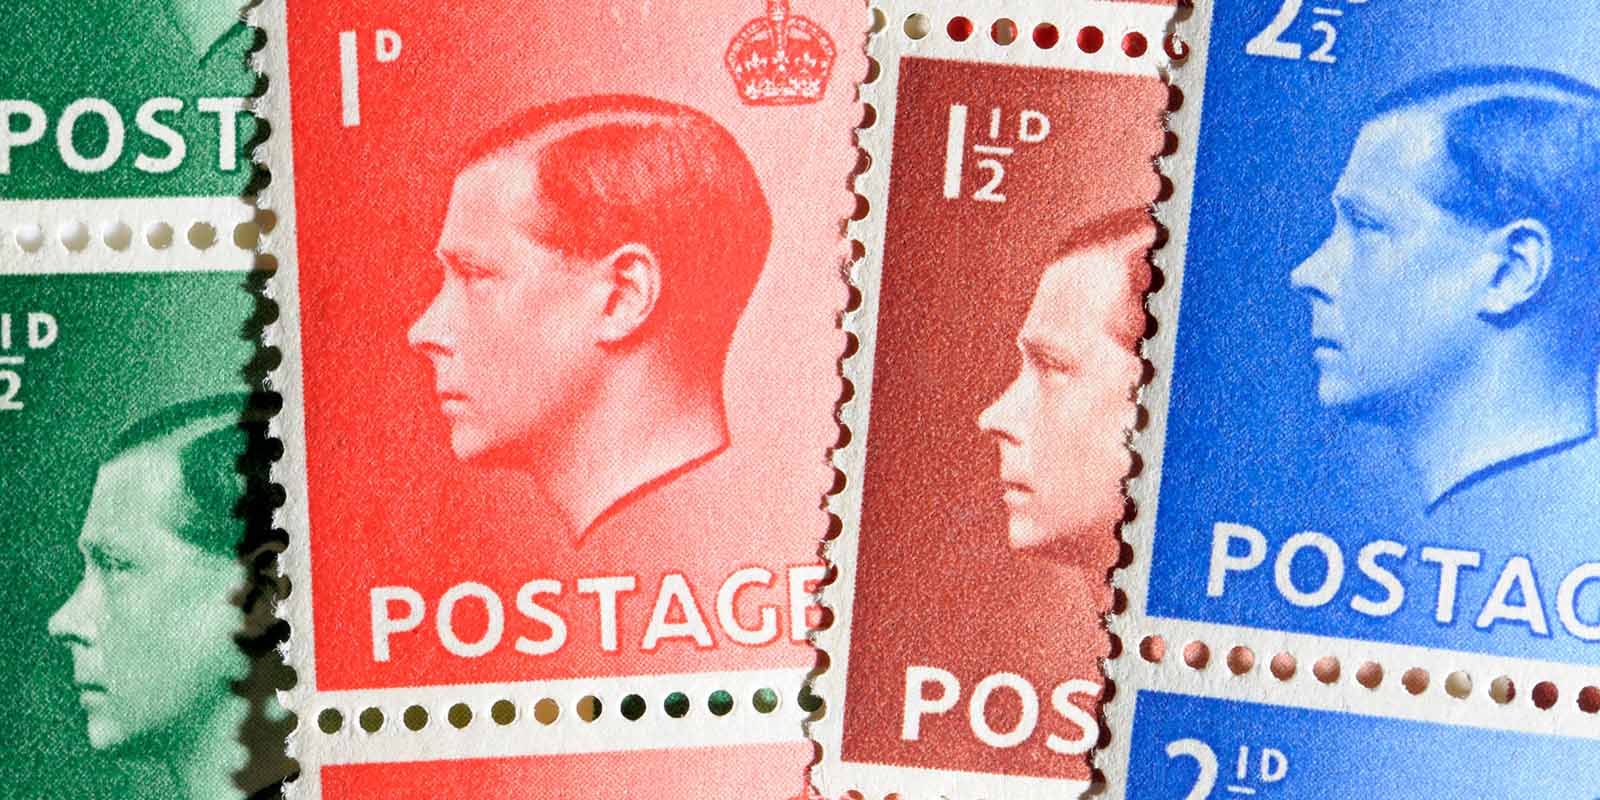 t6-supporting-image-Edward VIII.jpg